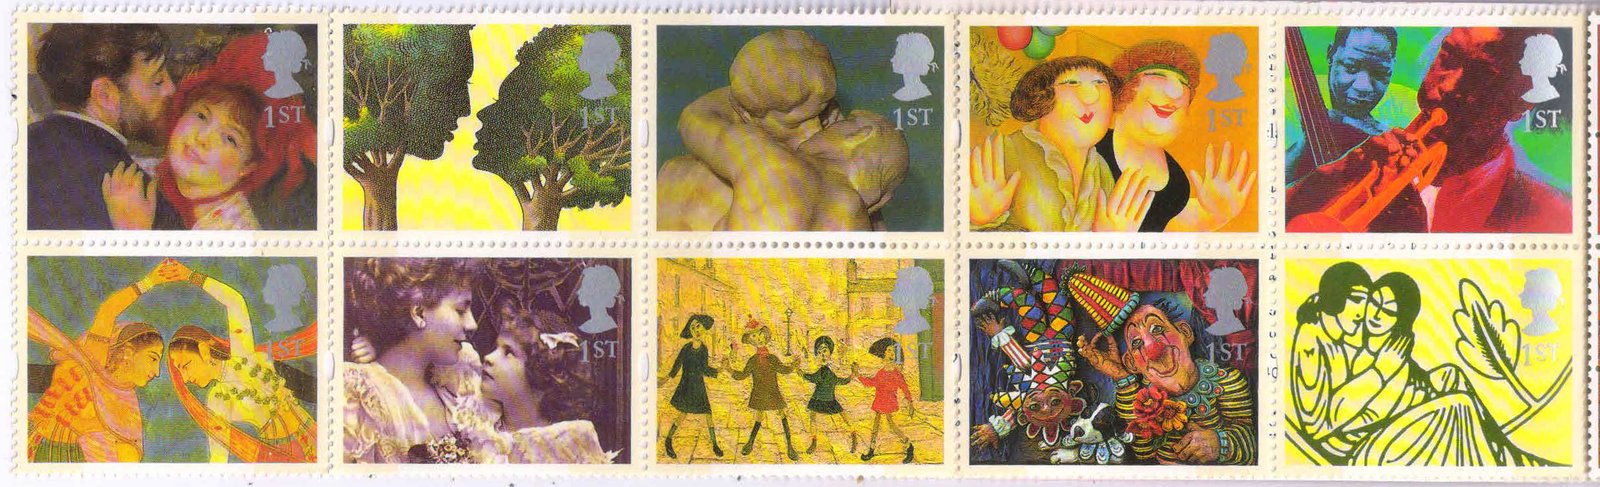 GREAT BRITAIN, England 1995-Greeting Stamps, "Greetings in Art", Set of 10, MNH, England, S.G. 1858-1867